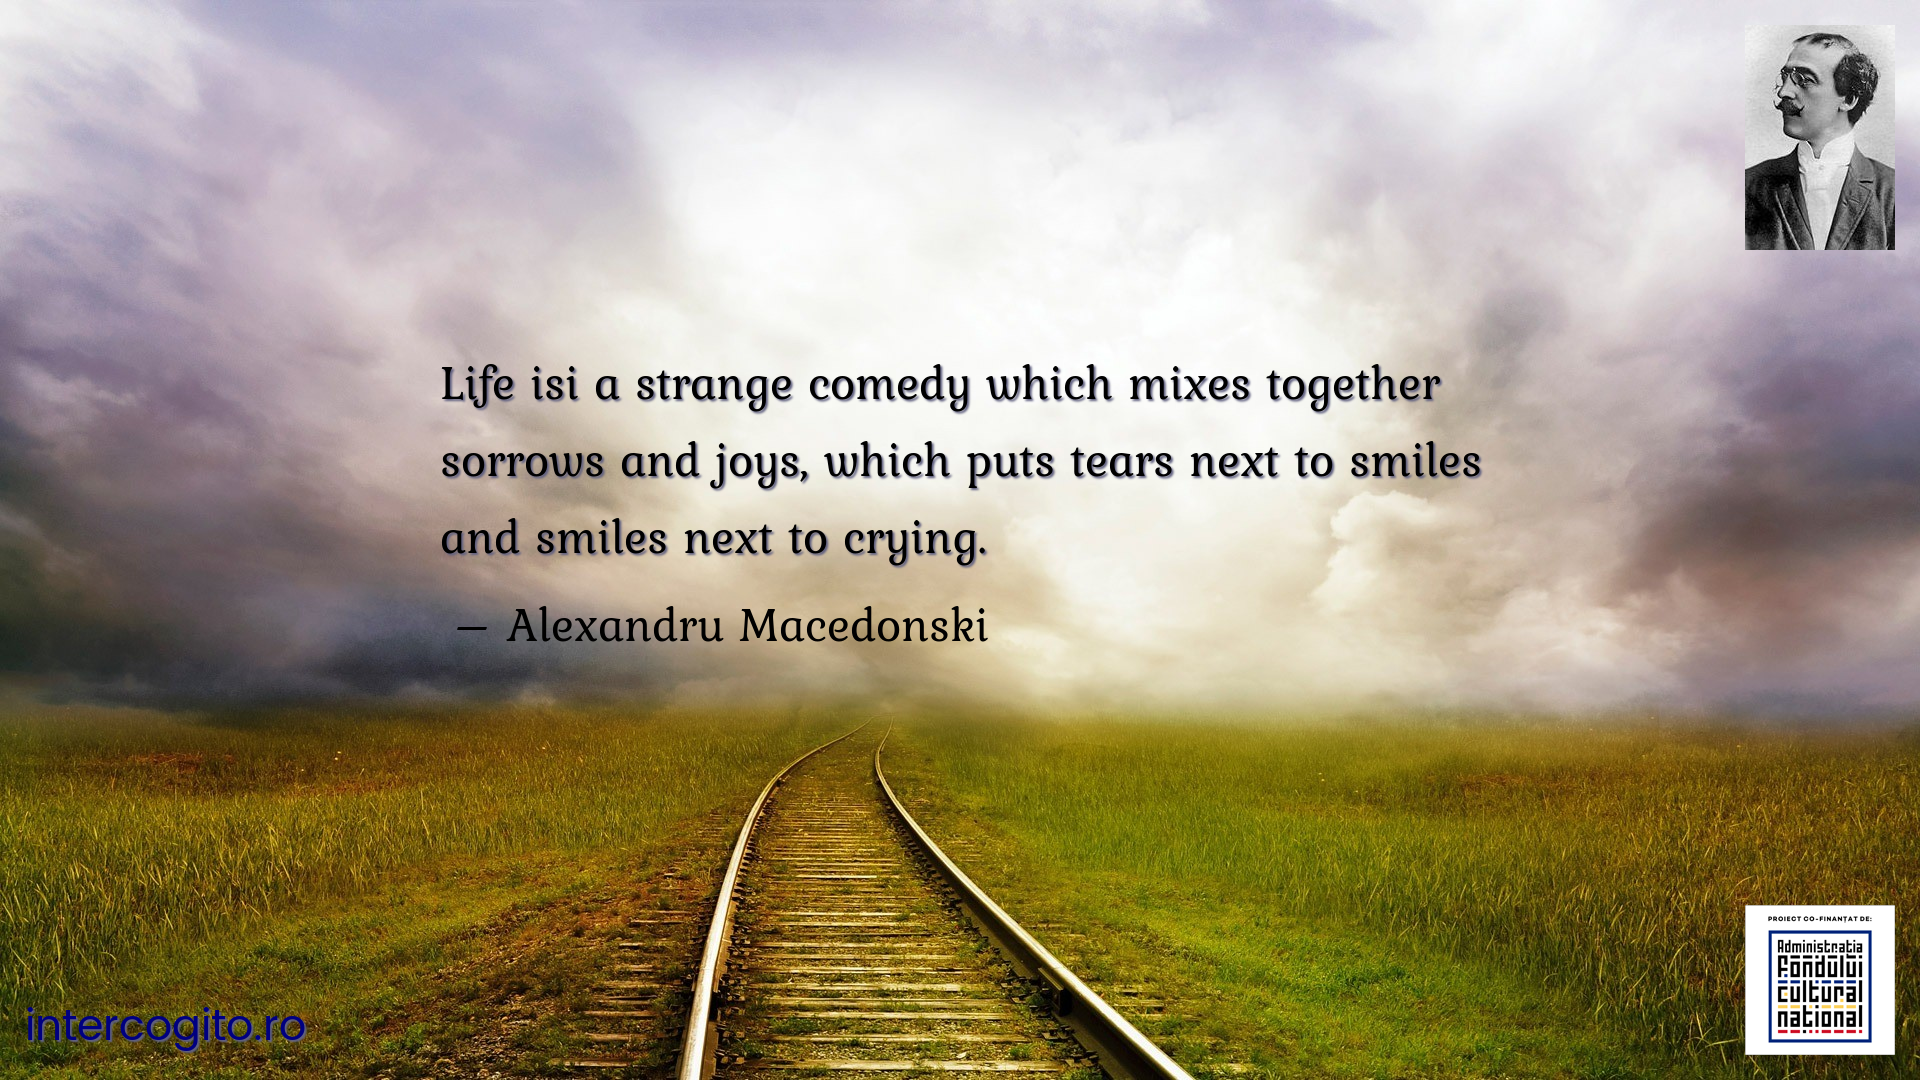 Life isi a strange comedy which mixes together sorrows and joys, which puts tears next to smiles and smiles next to crying.